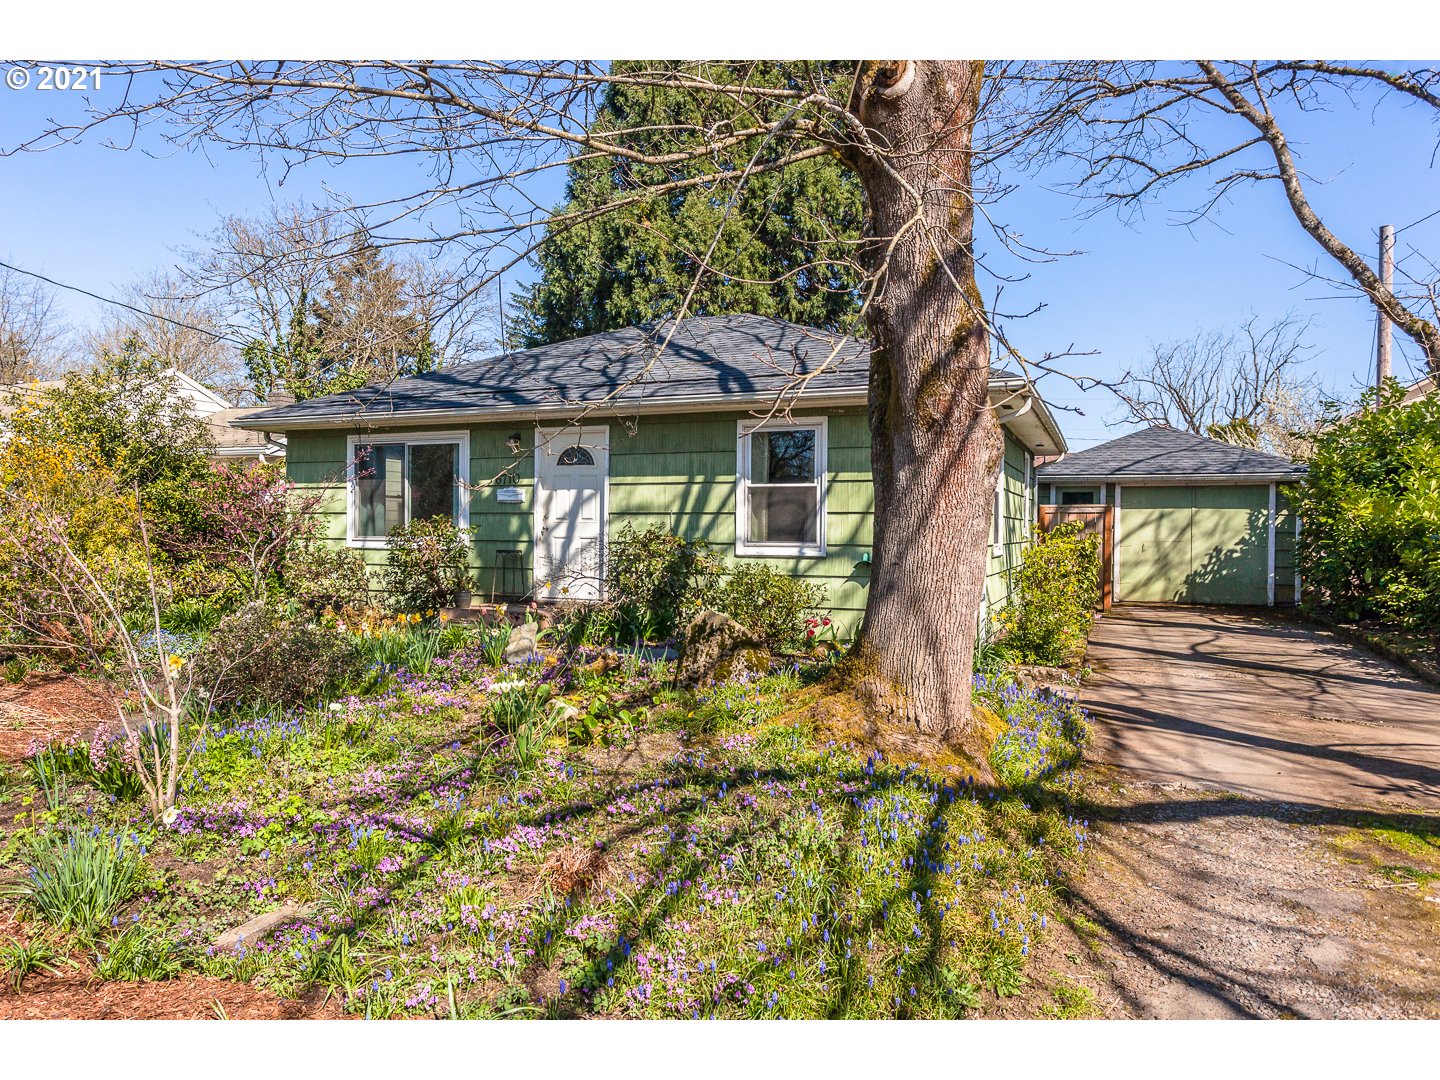 6710 SE 66TH AVE (1 of 25)